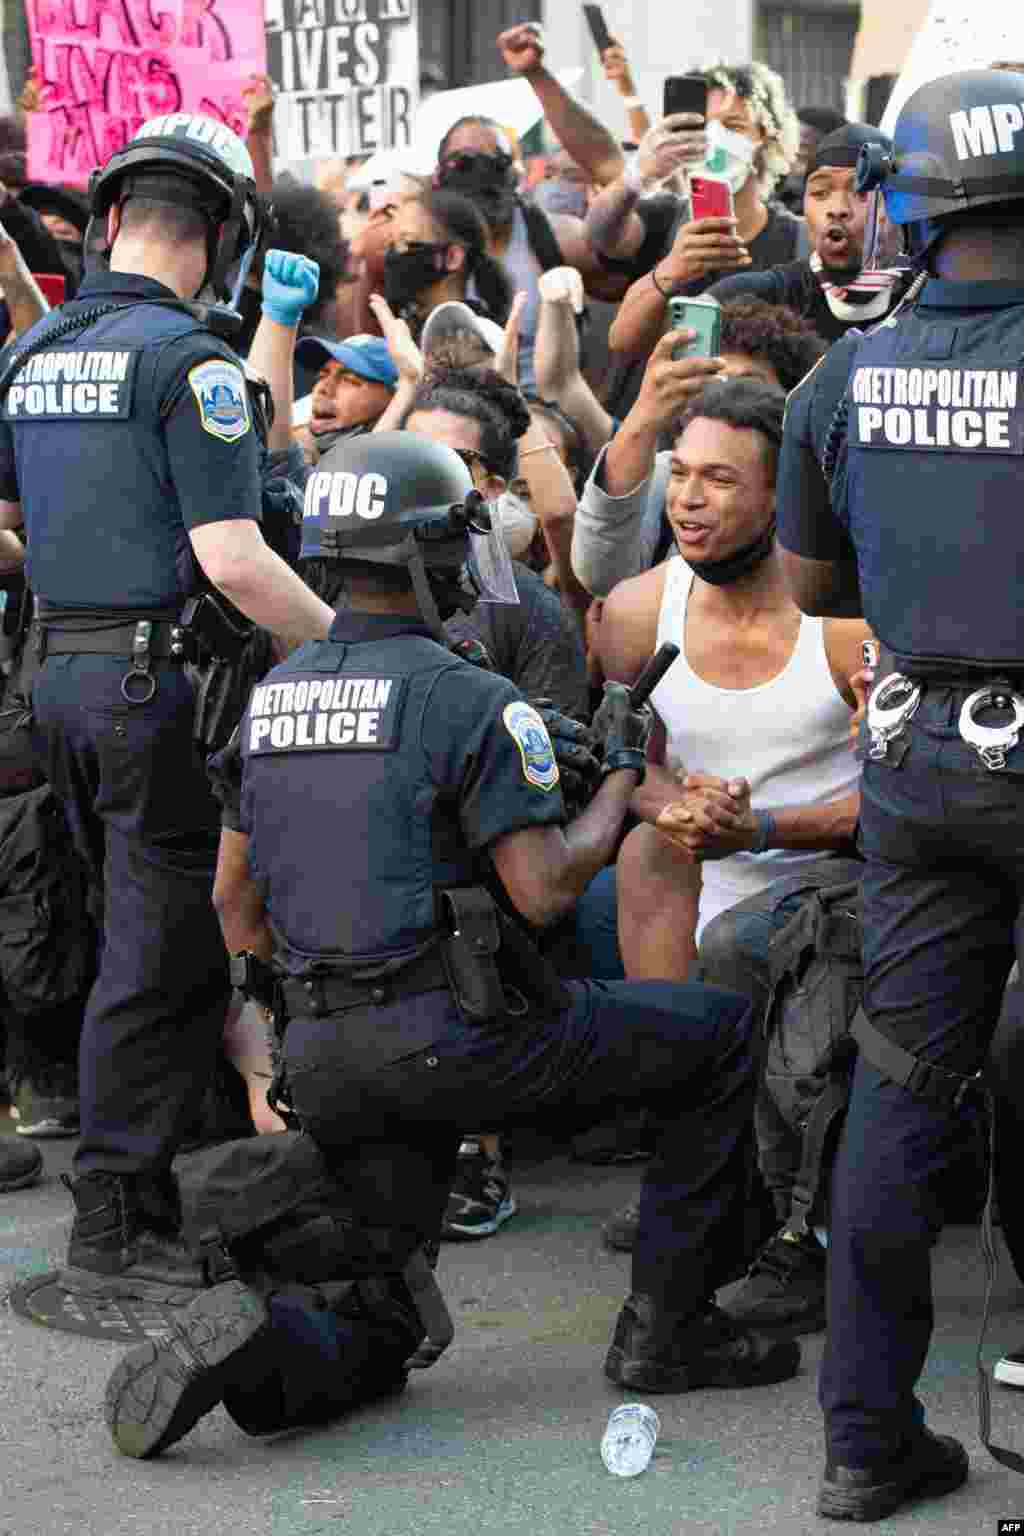 A man screams with emotion as he sees a policeman take a knee while hundreds protest the death of George Floyd next to the White House on May 31, 2020, in Washington, D.C.